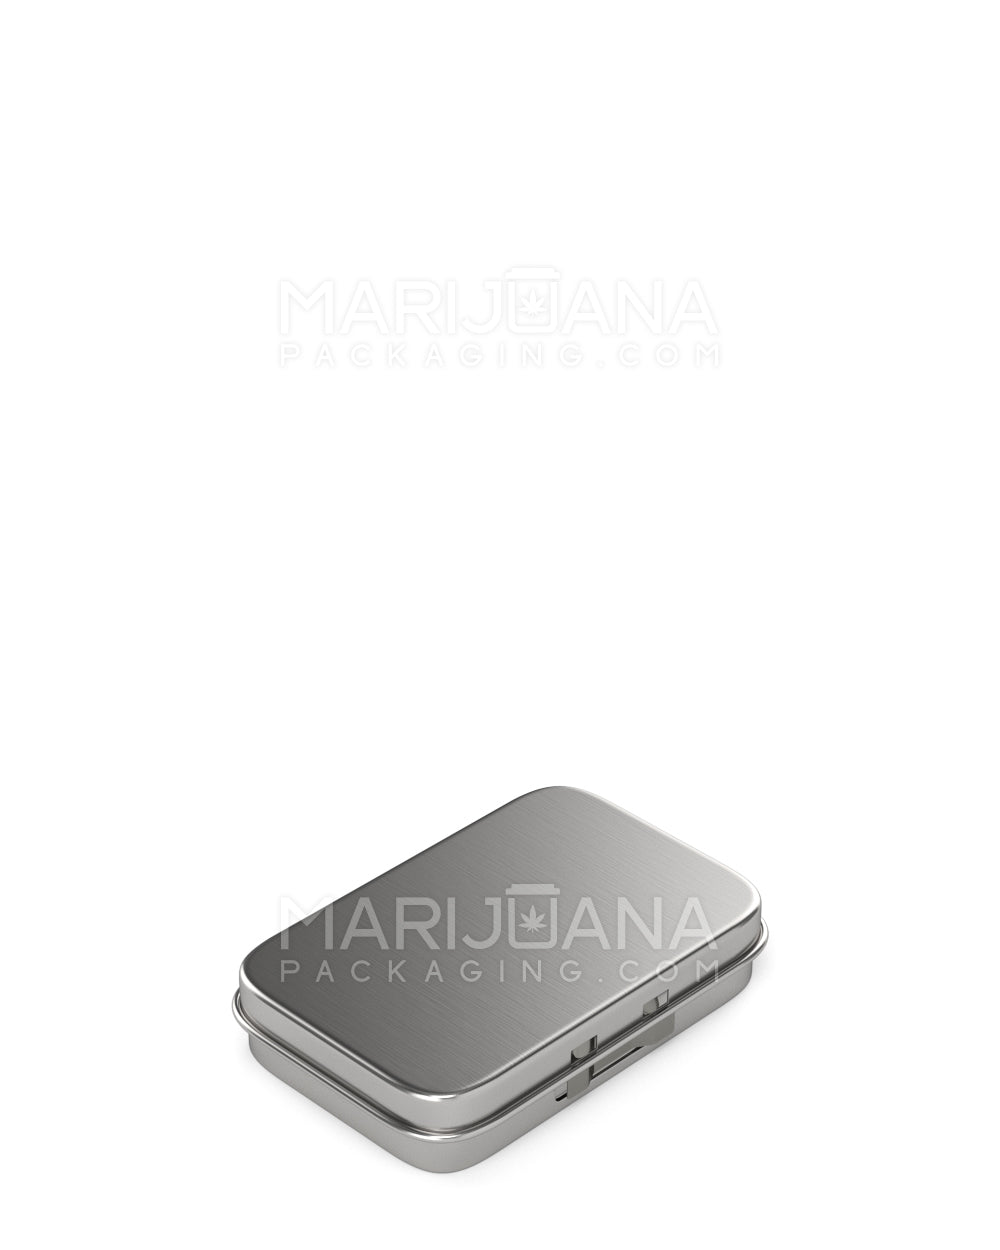 Child Resistant | 100% Recyclable Safely Lock Ultra Edible & Joint Box | 79mm x 53.5mm - Silver Tin - 4